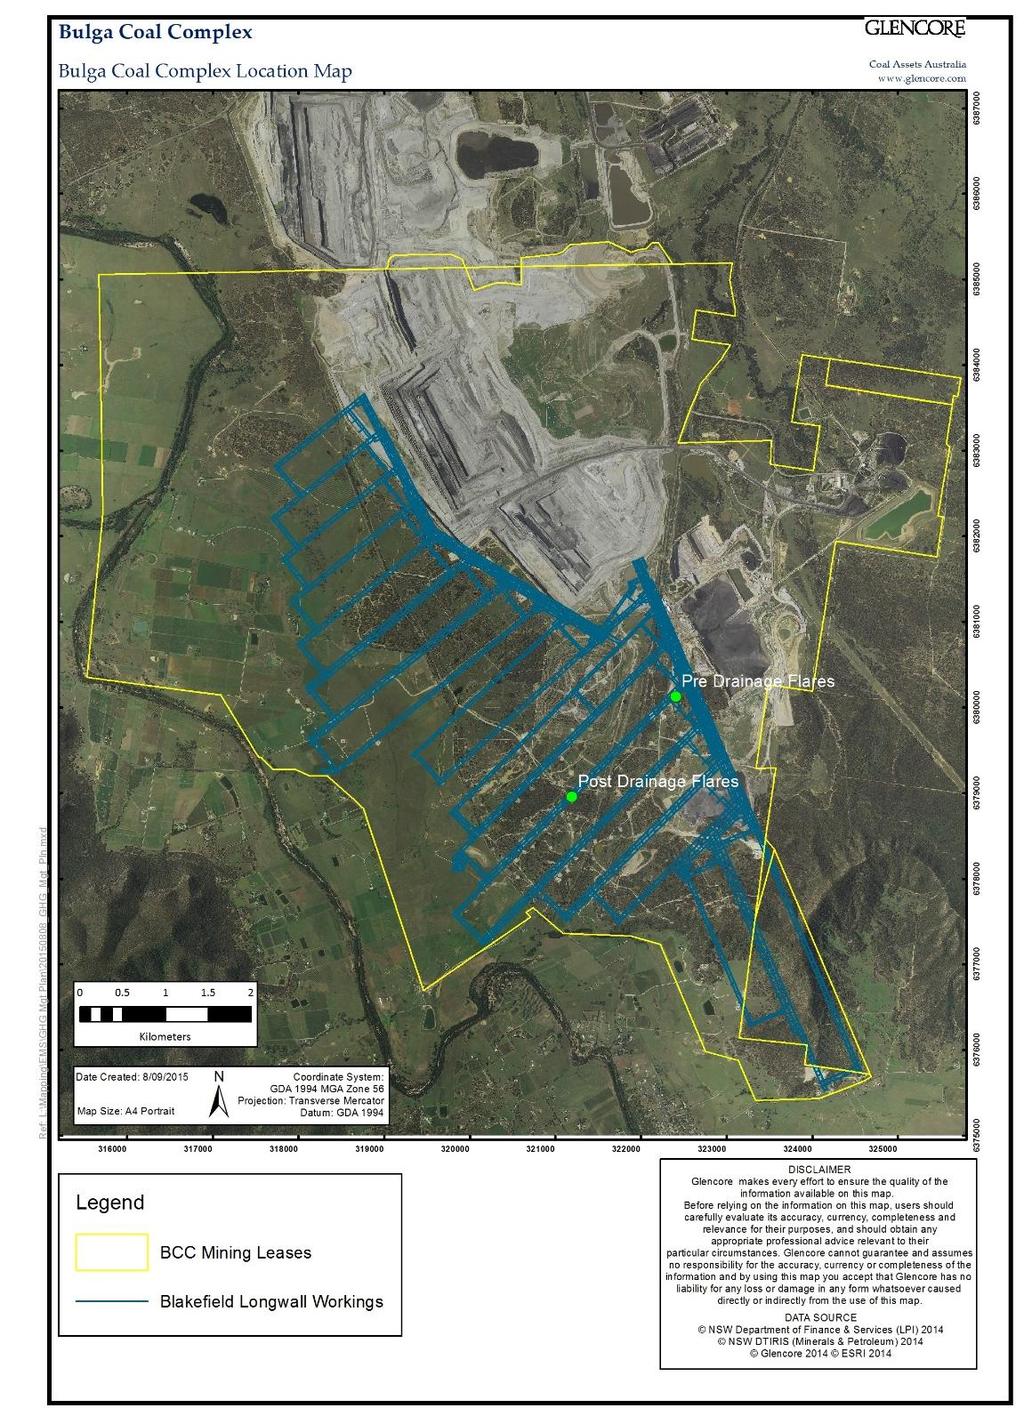 Management 1 Overview The Bulga Coal Complex (BCC) comprises two coal mining operations, the Bulga Surface Operations (BSO), which incorporates the Bulga Coal Complex Coal Handling and Preparation t